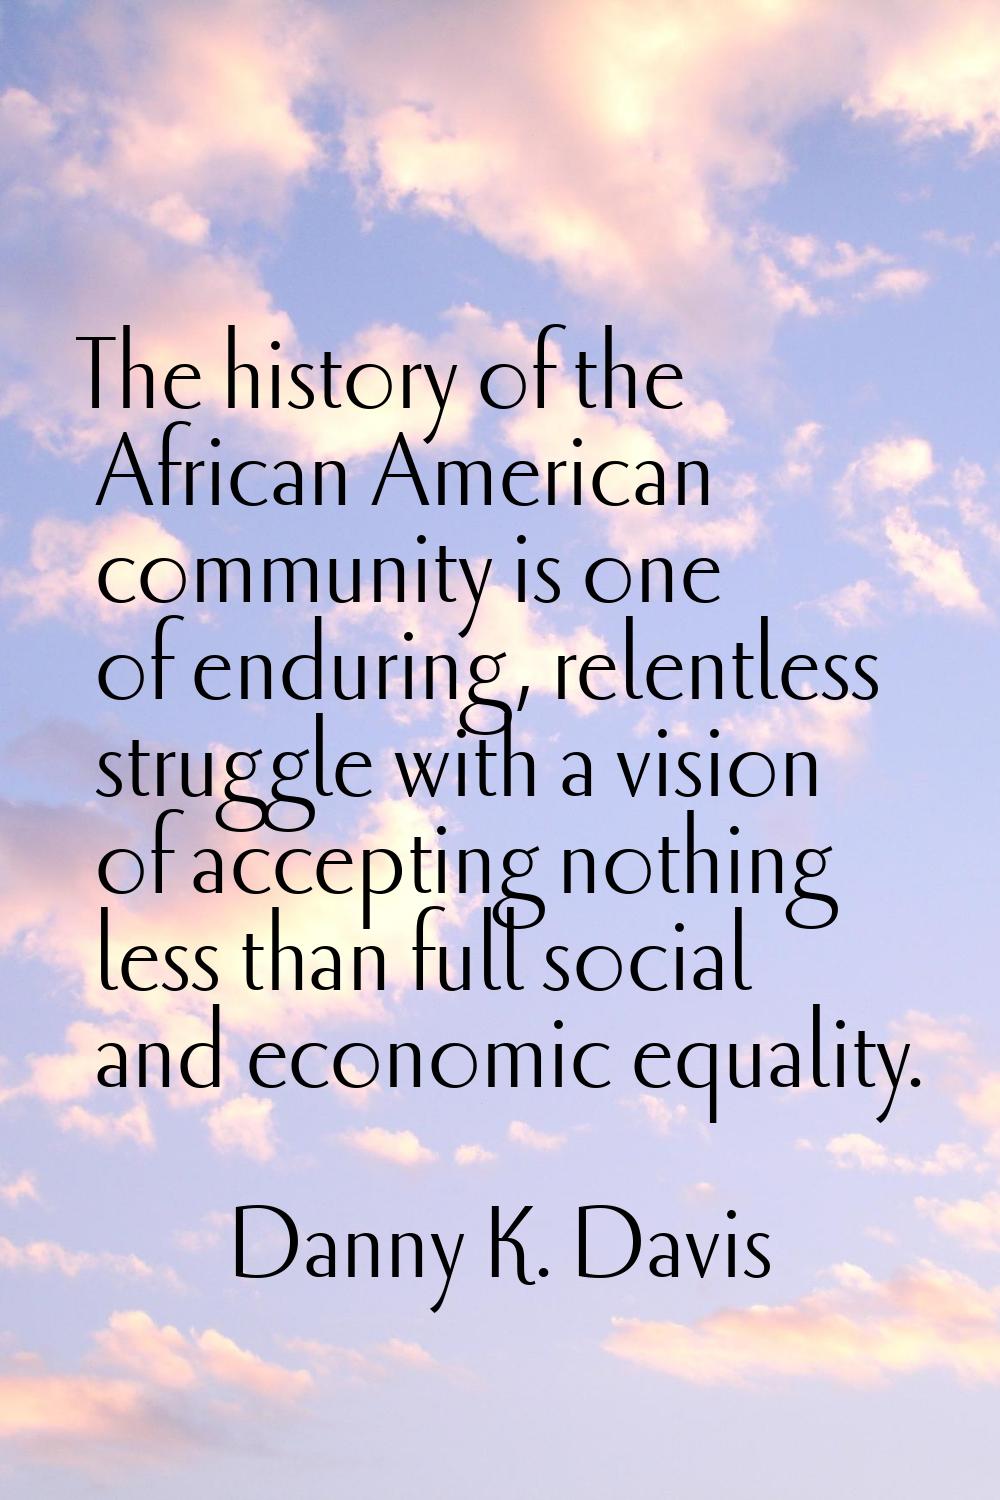 The history of the African American community is one of enduring, relentless struggle with a vision